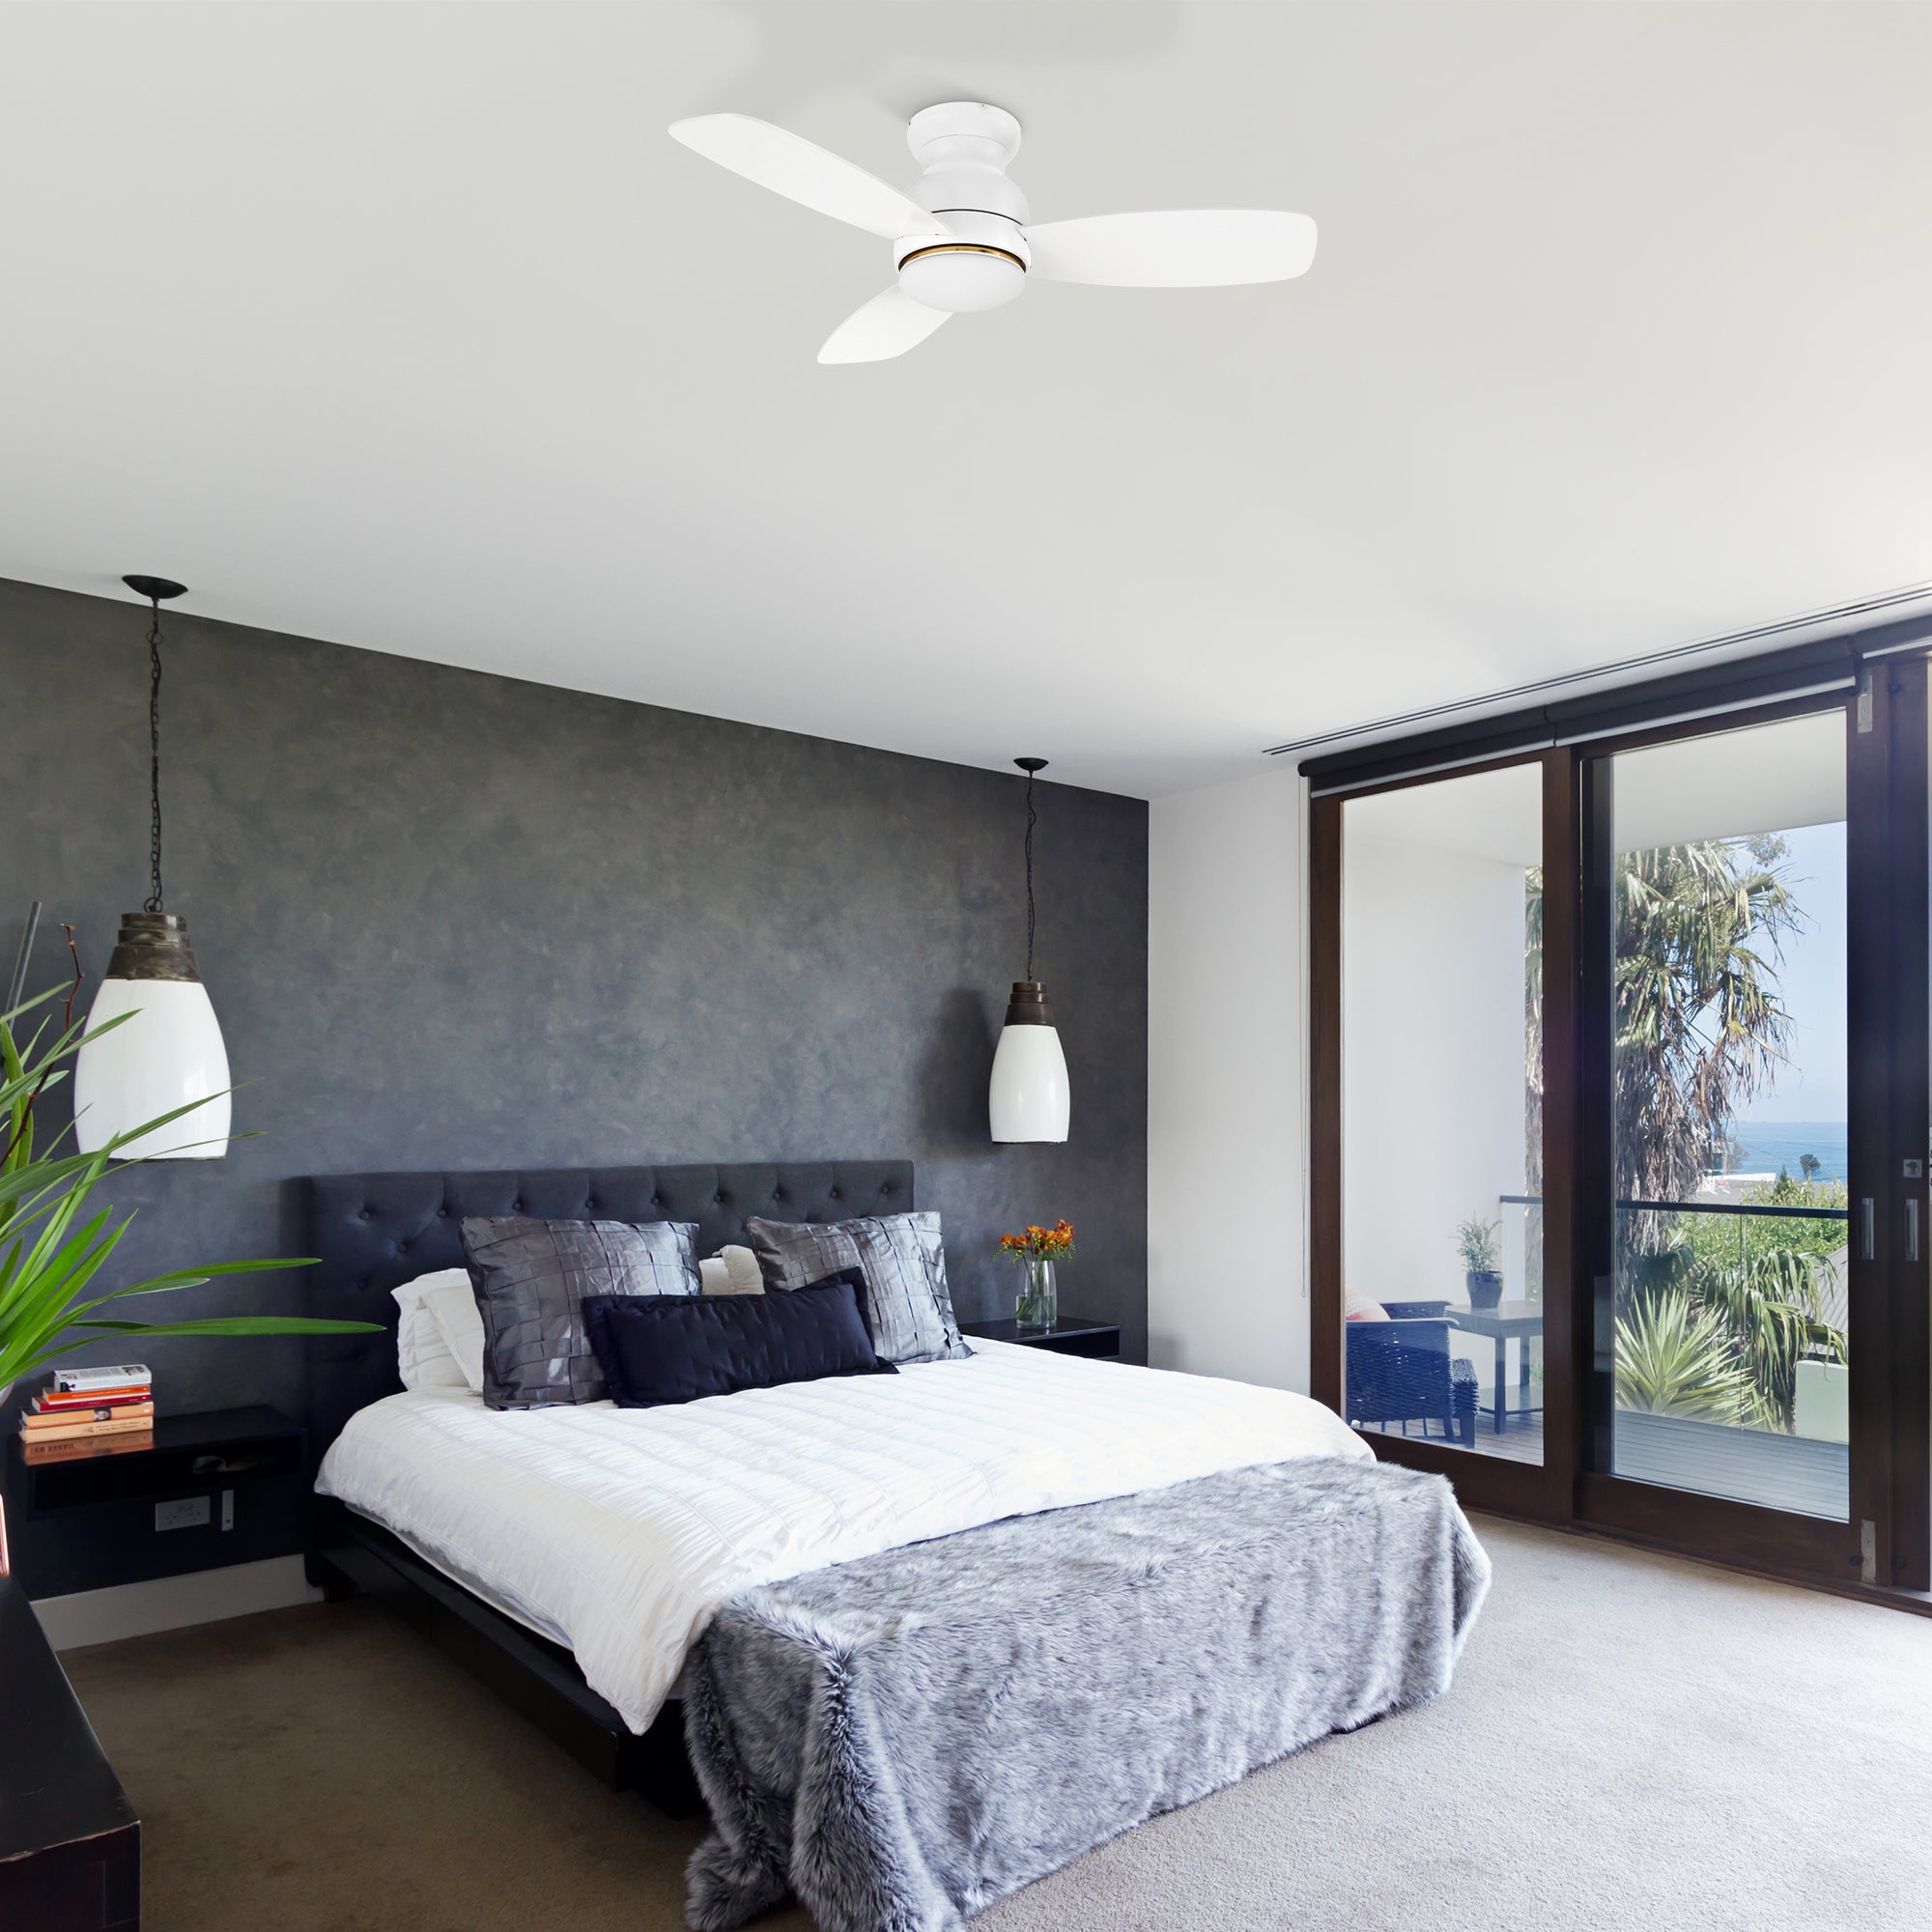 Create the home environment of your dreams with the versatile and powerful Arran 44 /48 /60 inches modern ceiling fan with lights! On the inside, The remote control ceiling fan features advanced motor and lighting technology for energy efficiency and precise control. On the outside, the Arran low profile ceiling fan features a sleek silhouette, elegant blades, and a timeless black or white finish for the ideal fit in any home interior! 